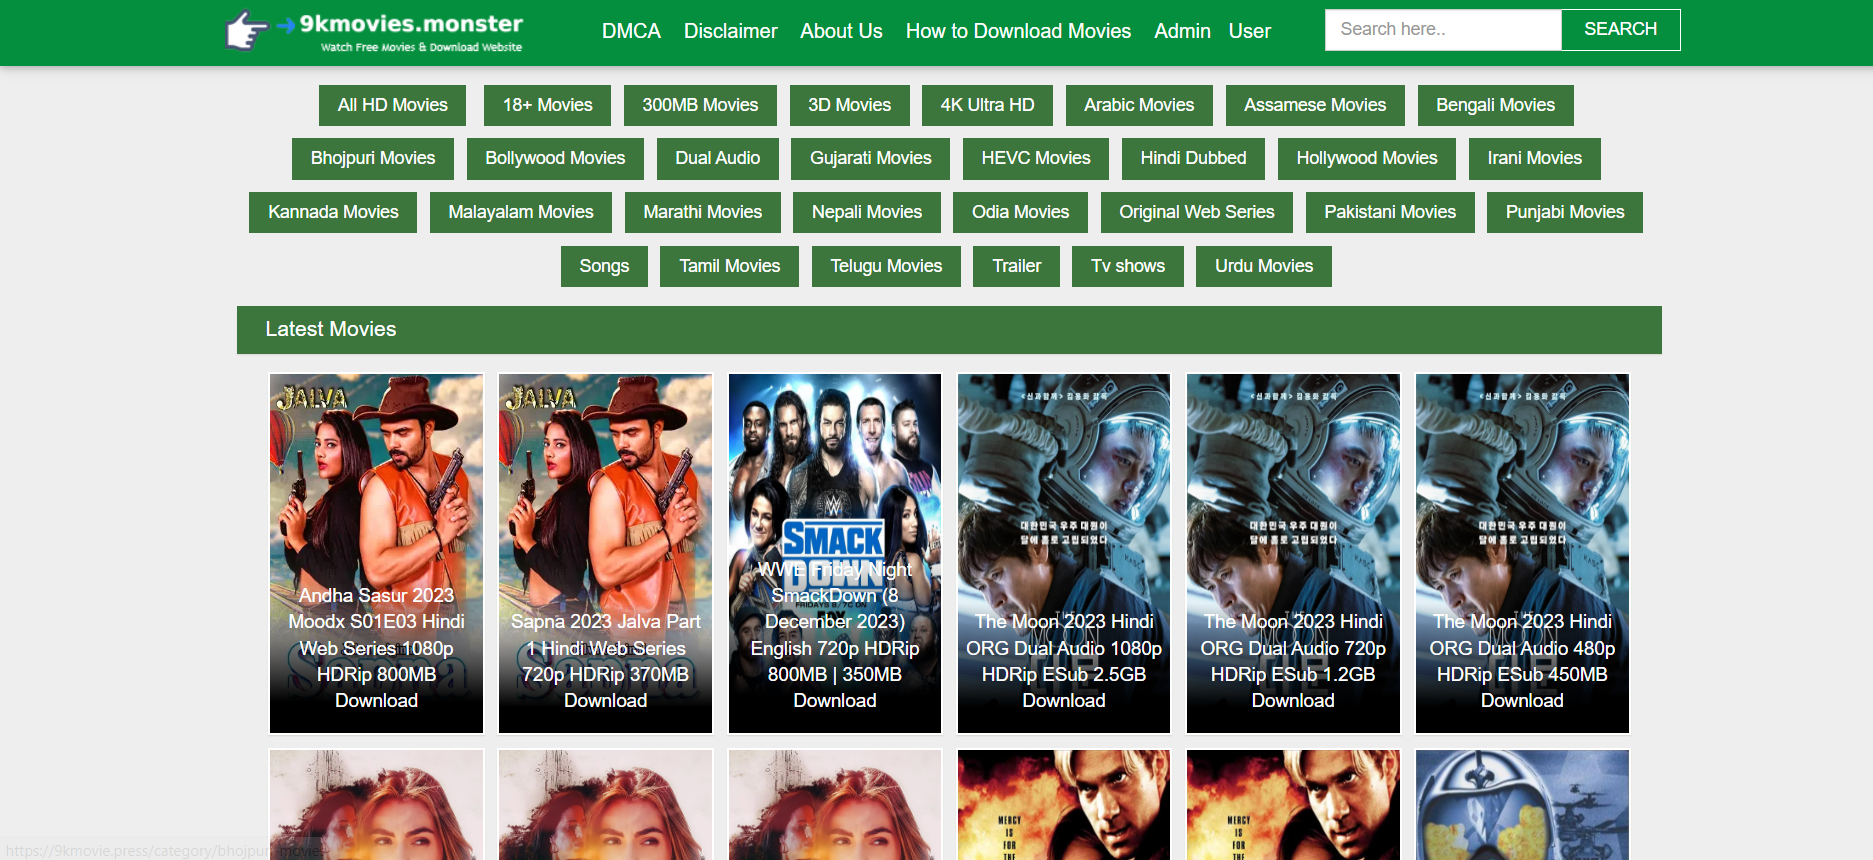 One of the top sites offering free movie streaming online is 9kmovie